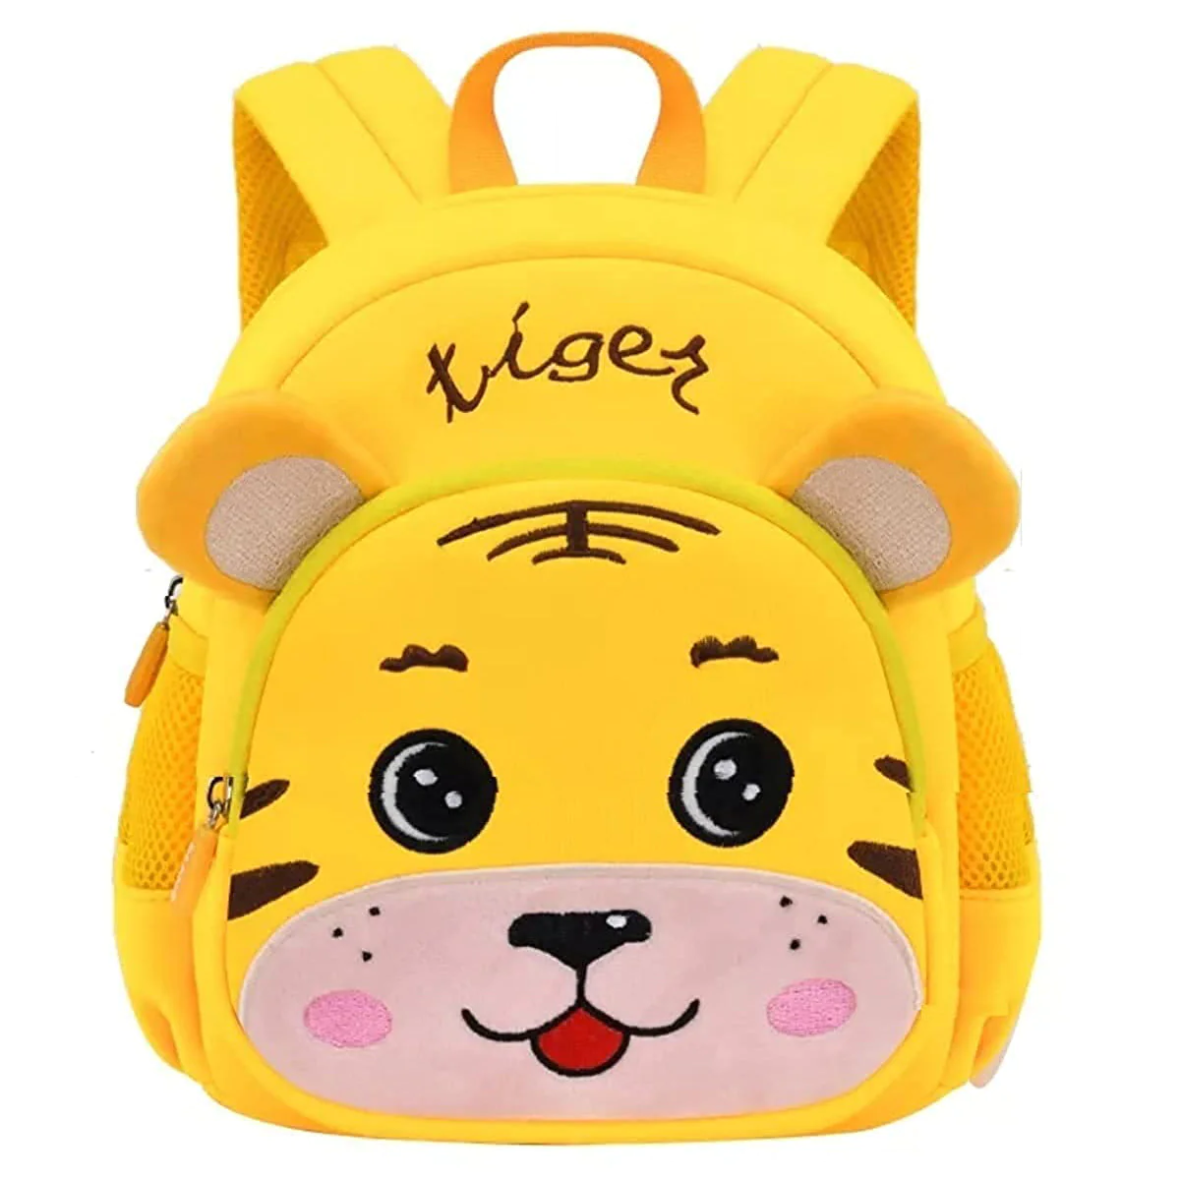 U Smile Little Tiger Design Bag for Pre-Schoolers Kids, Water Resistant Mini Backpack for Kids, Lightweight Small Size Bag for Play School & Nursery Kids, Picnic Bag, Travel, Yellow, 1-4 Years